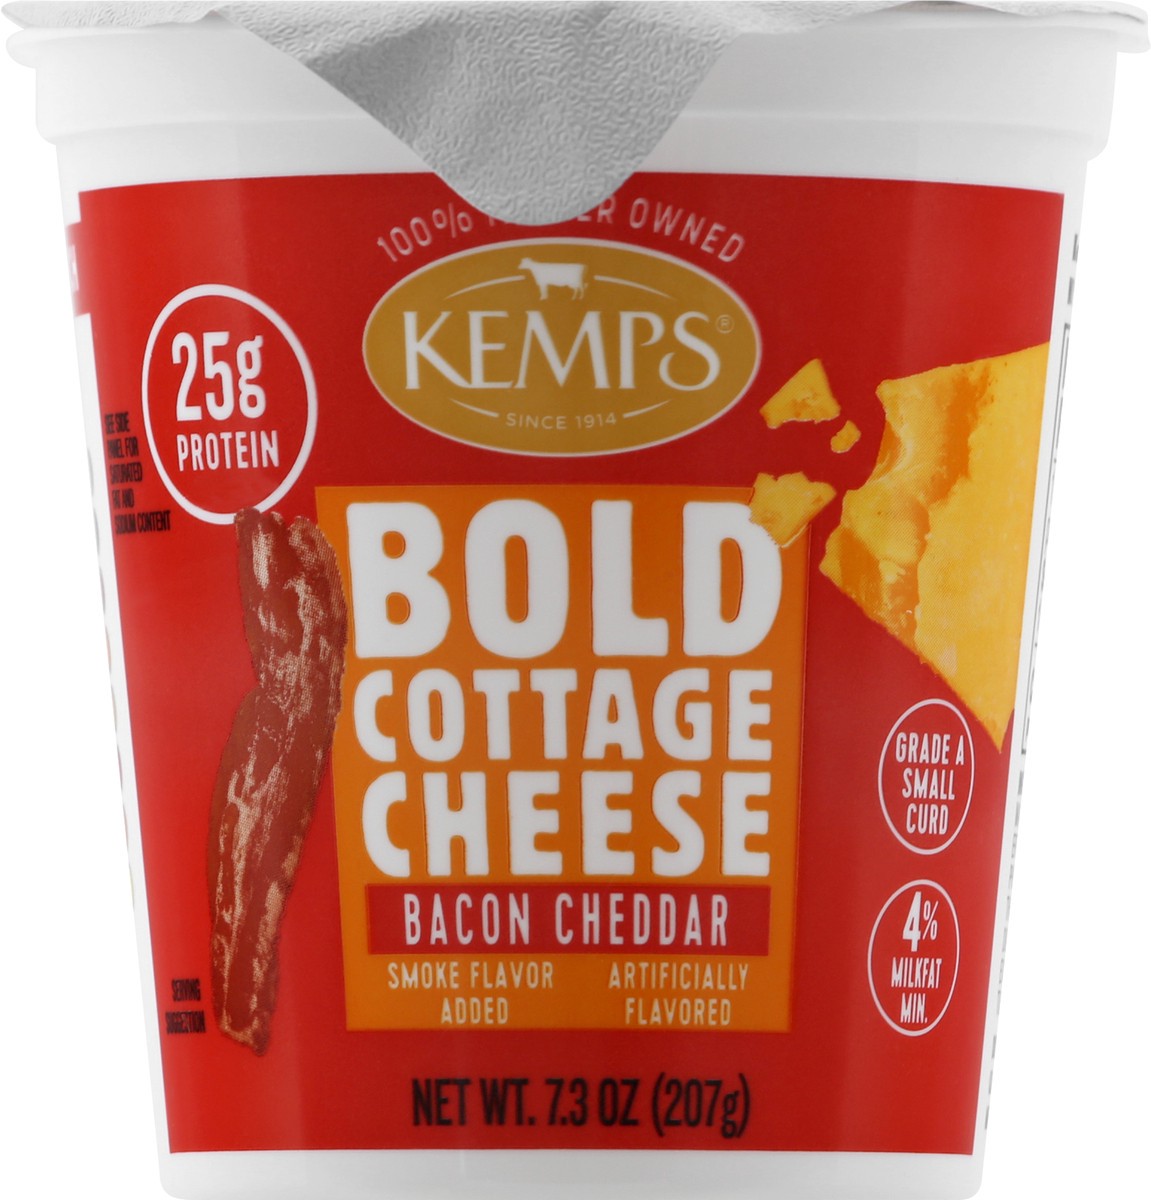 slide 6 of 13, Kemps Small Curd 4% Milkfat Min Bold Bacon Cheddar Cottage Cheese 7.3 oz, 7.3 oz